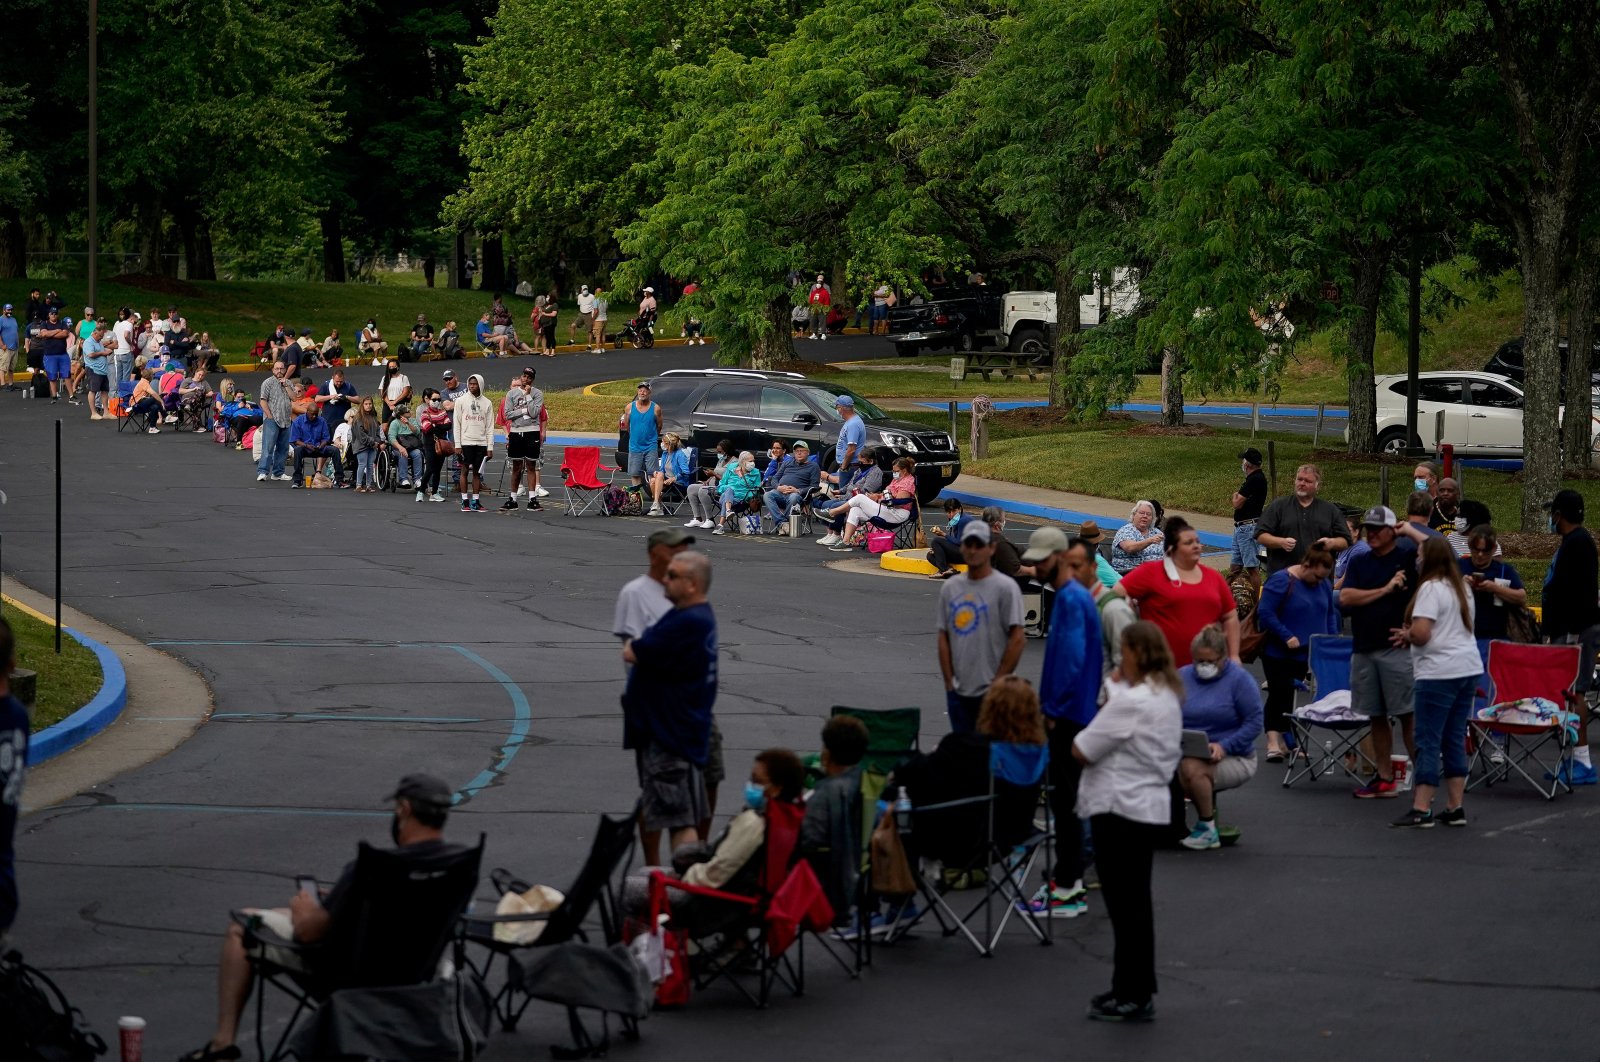 People line up outside Kentucky Career Center prior to its opening to find assistance with their unemployment claims in Frankfort, Kentucky, U.S. on June 18, 2020. (Reuters Photo)